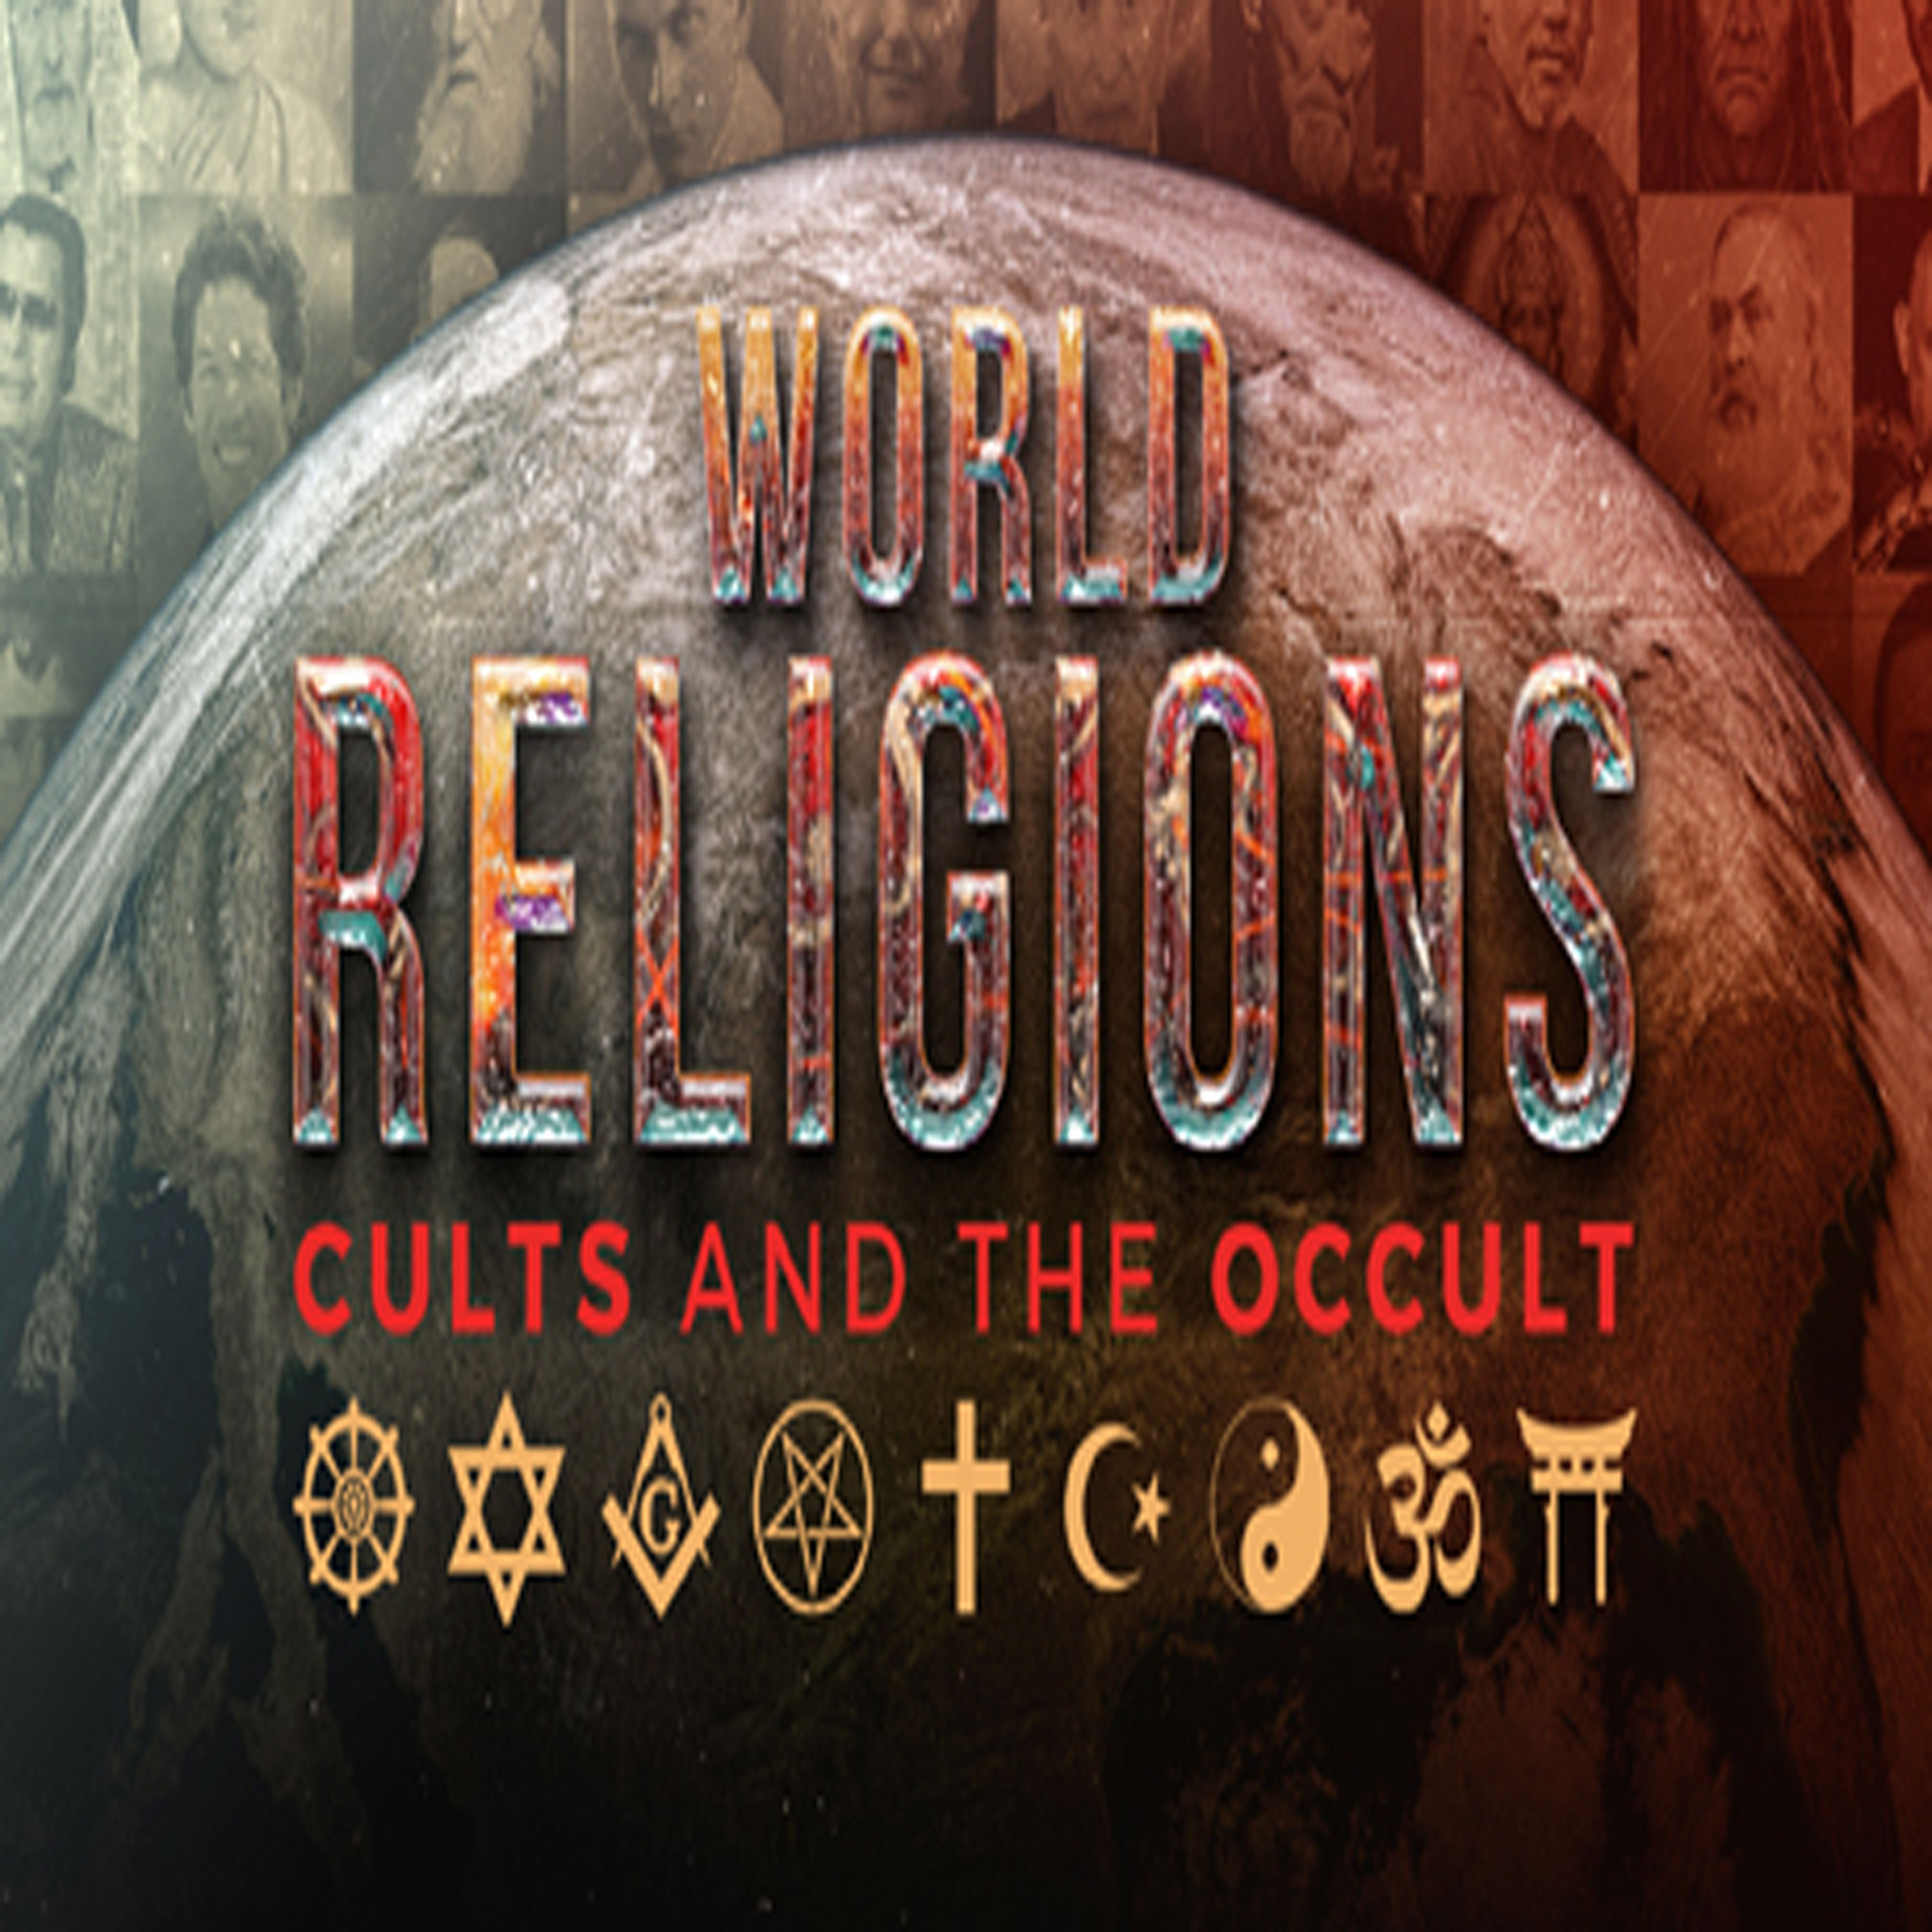 World Religions, Cults and The Occult - Video Podcast artwork